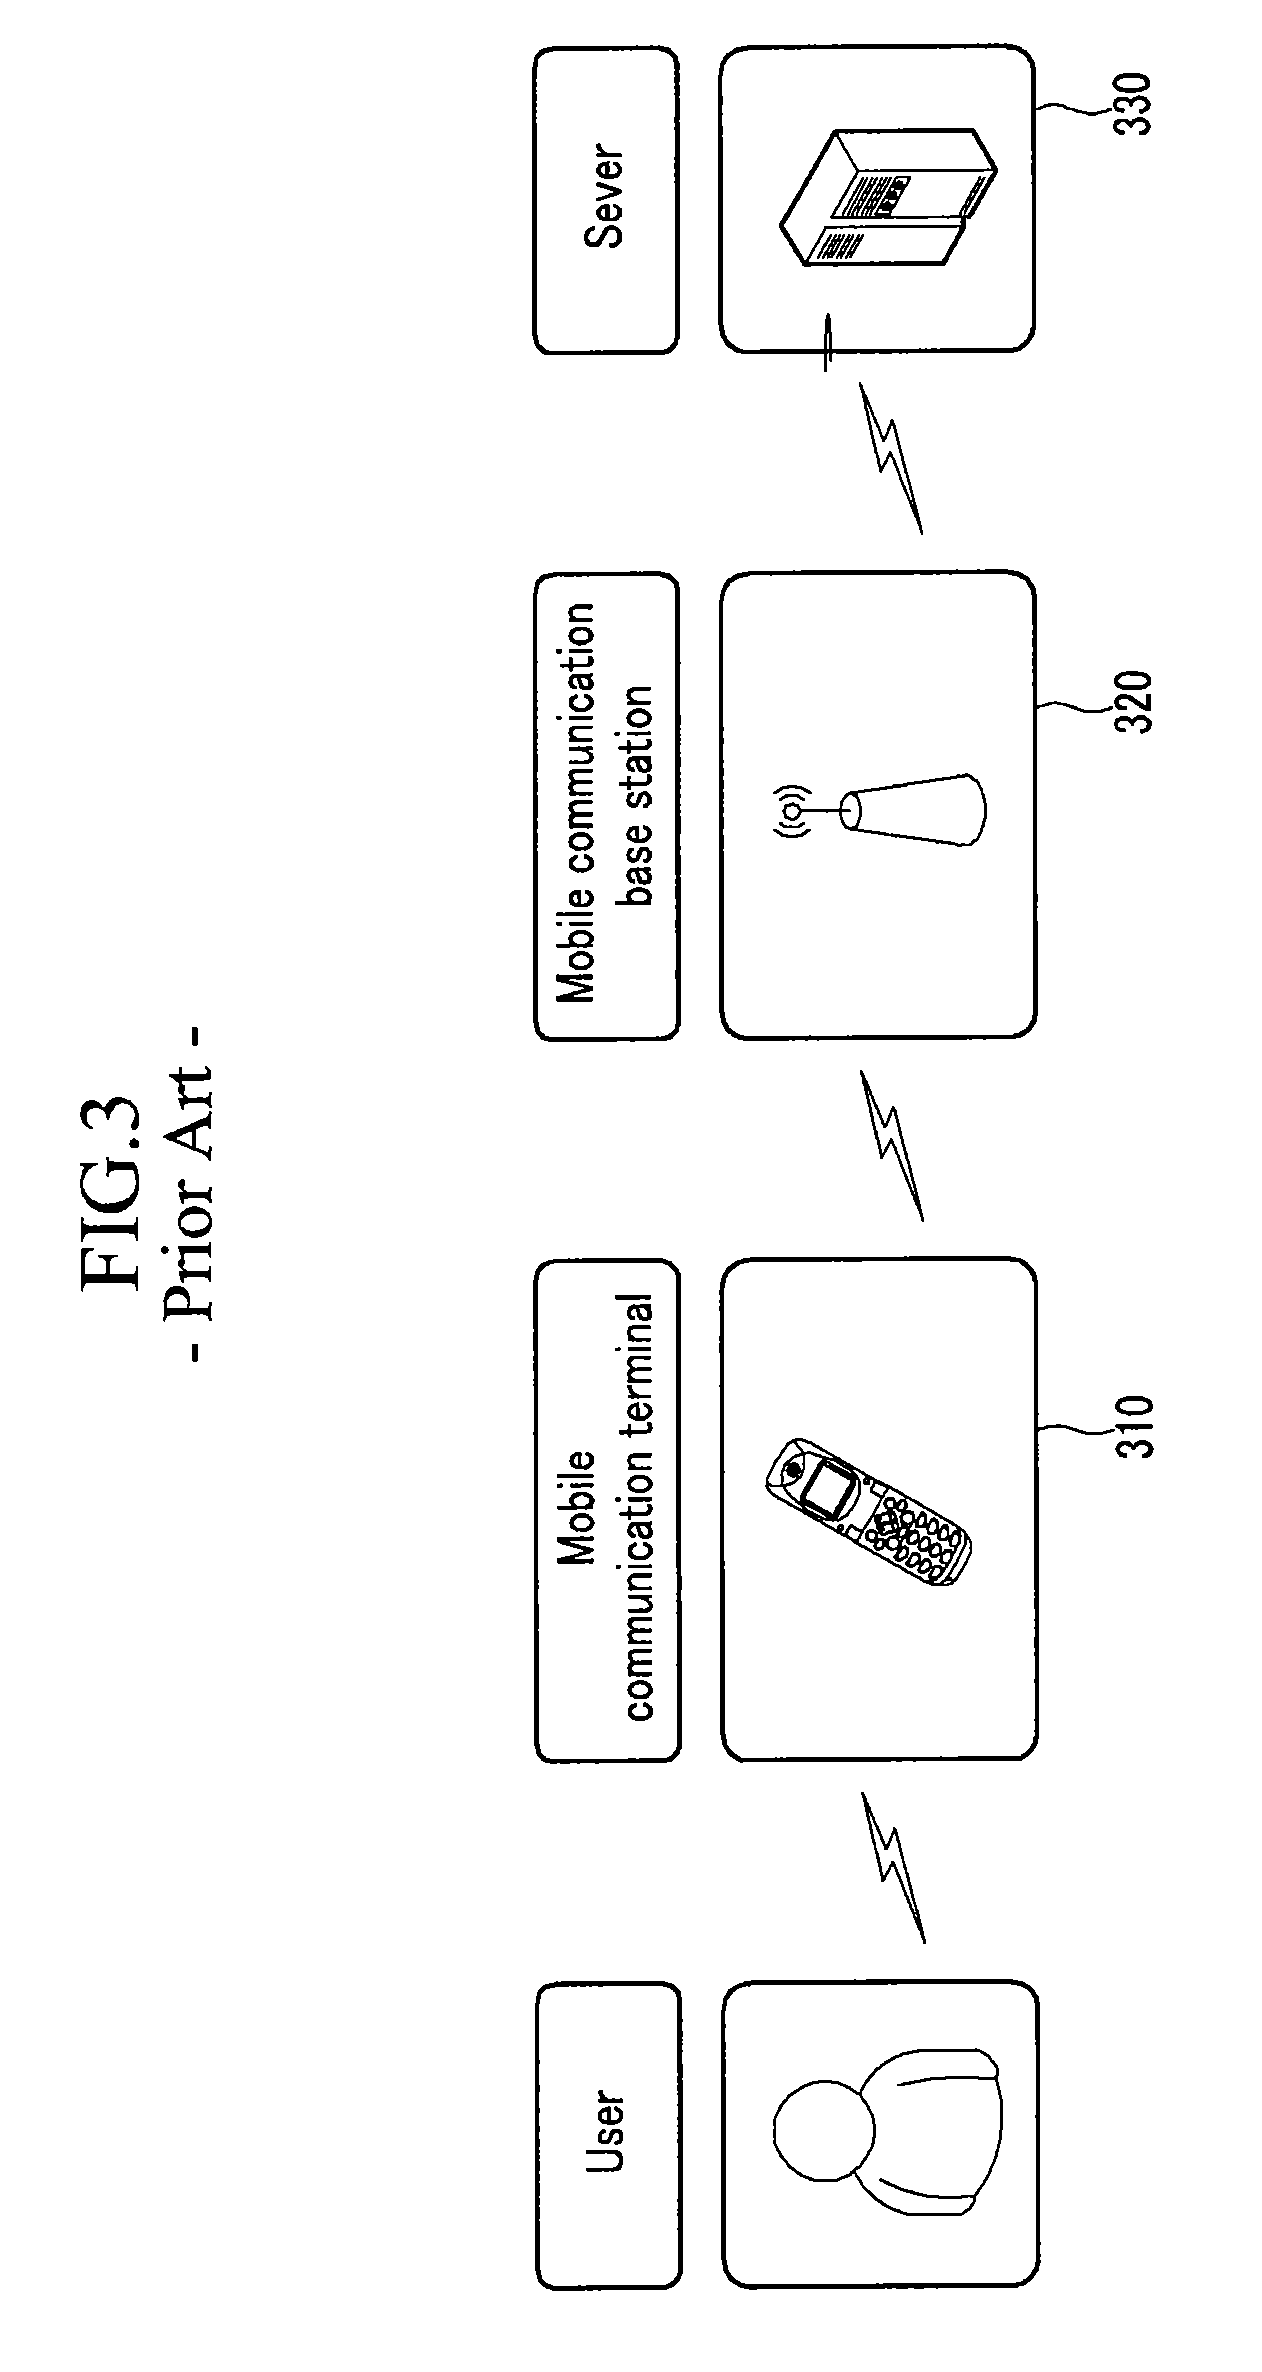 System and method of transmitting emergency condition using wireless sensor network